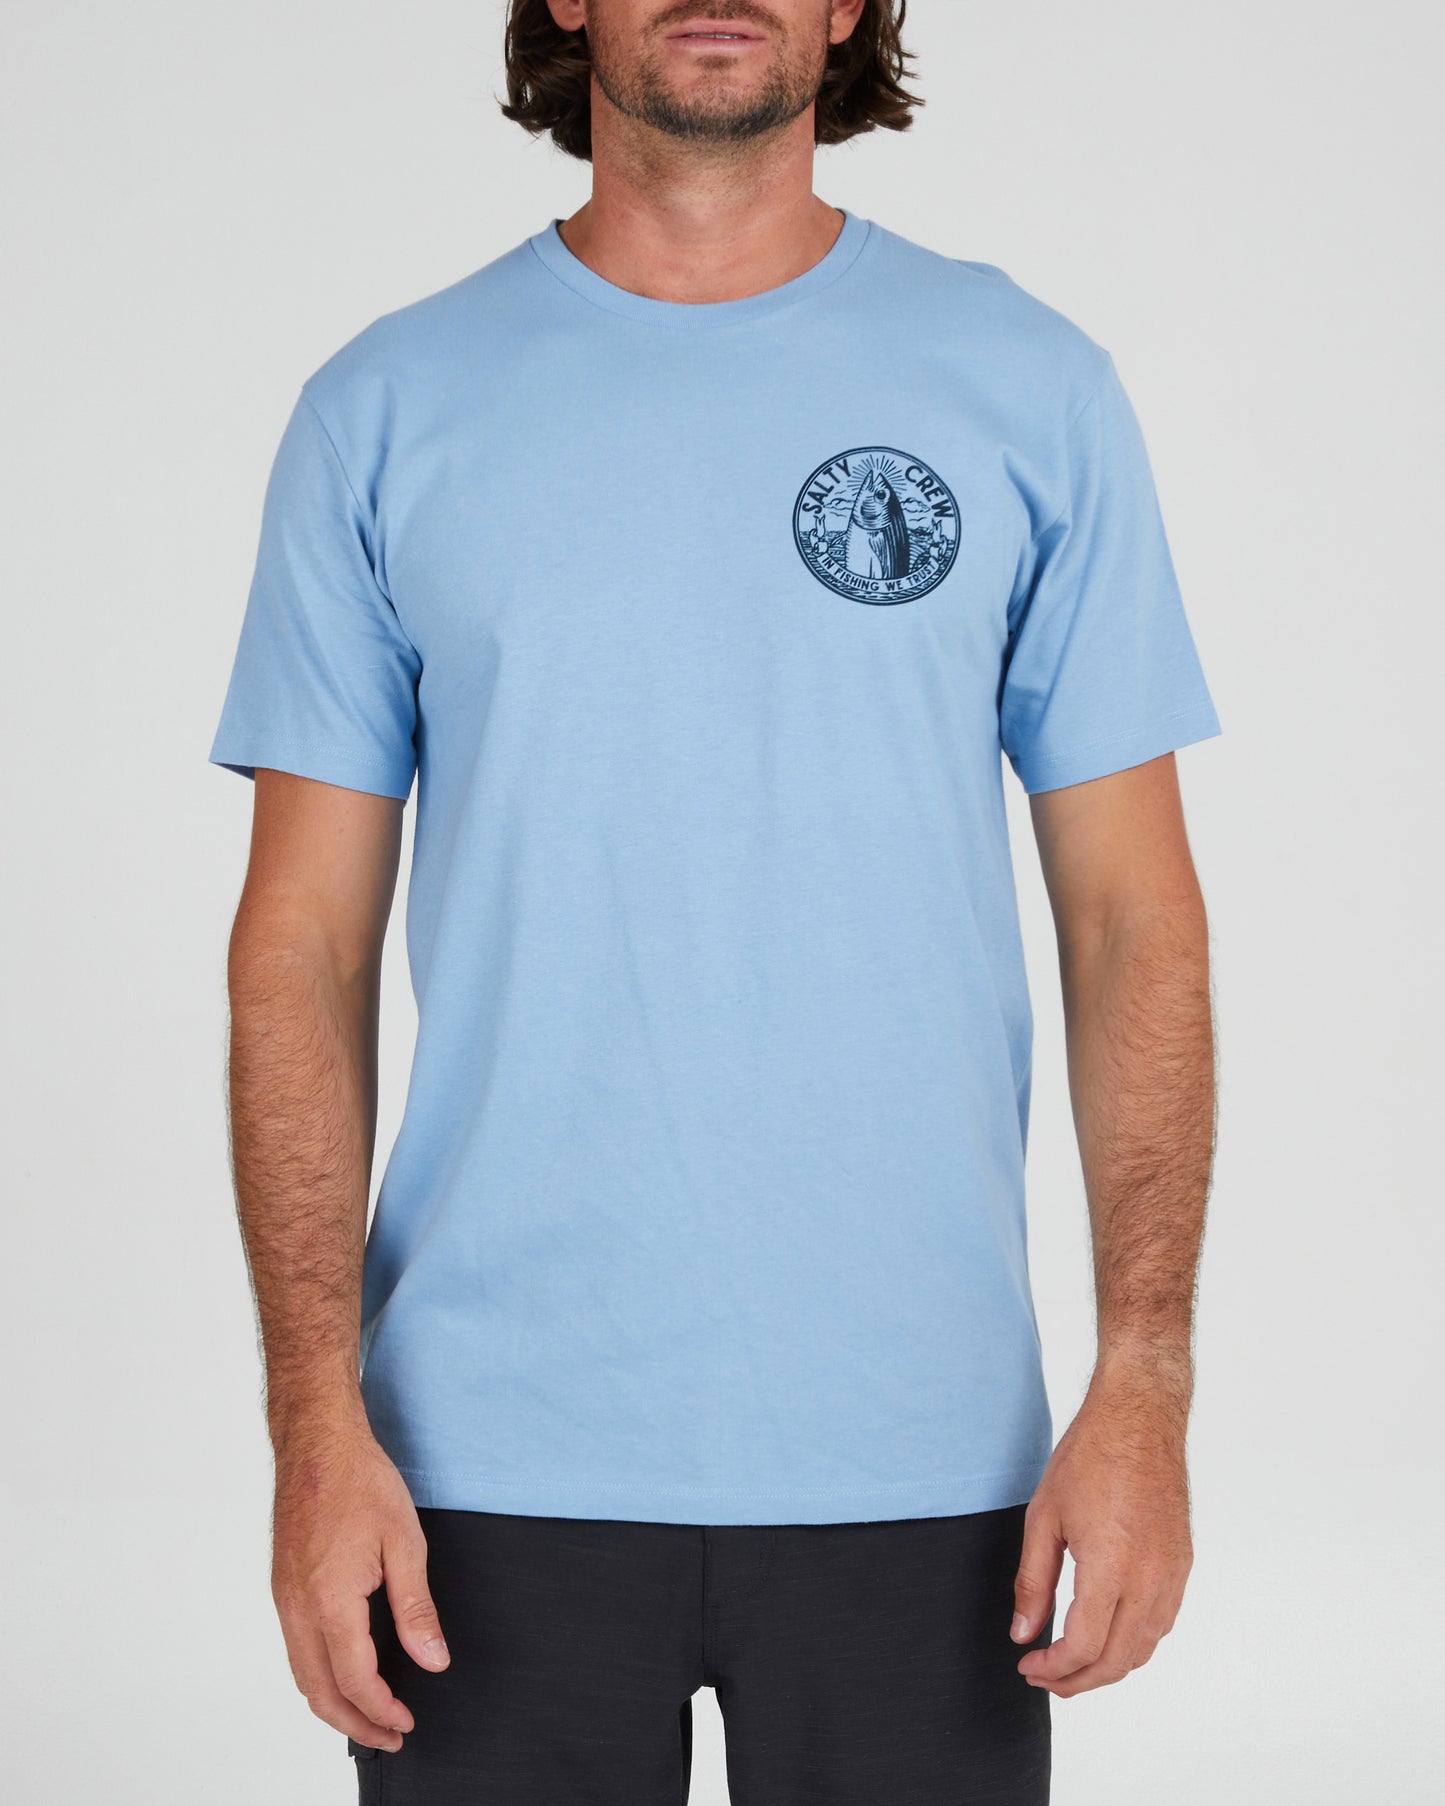 On body front of the In Fishing We Trust Marine Blue S/S Premium Tee